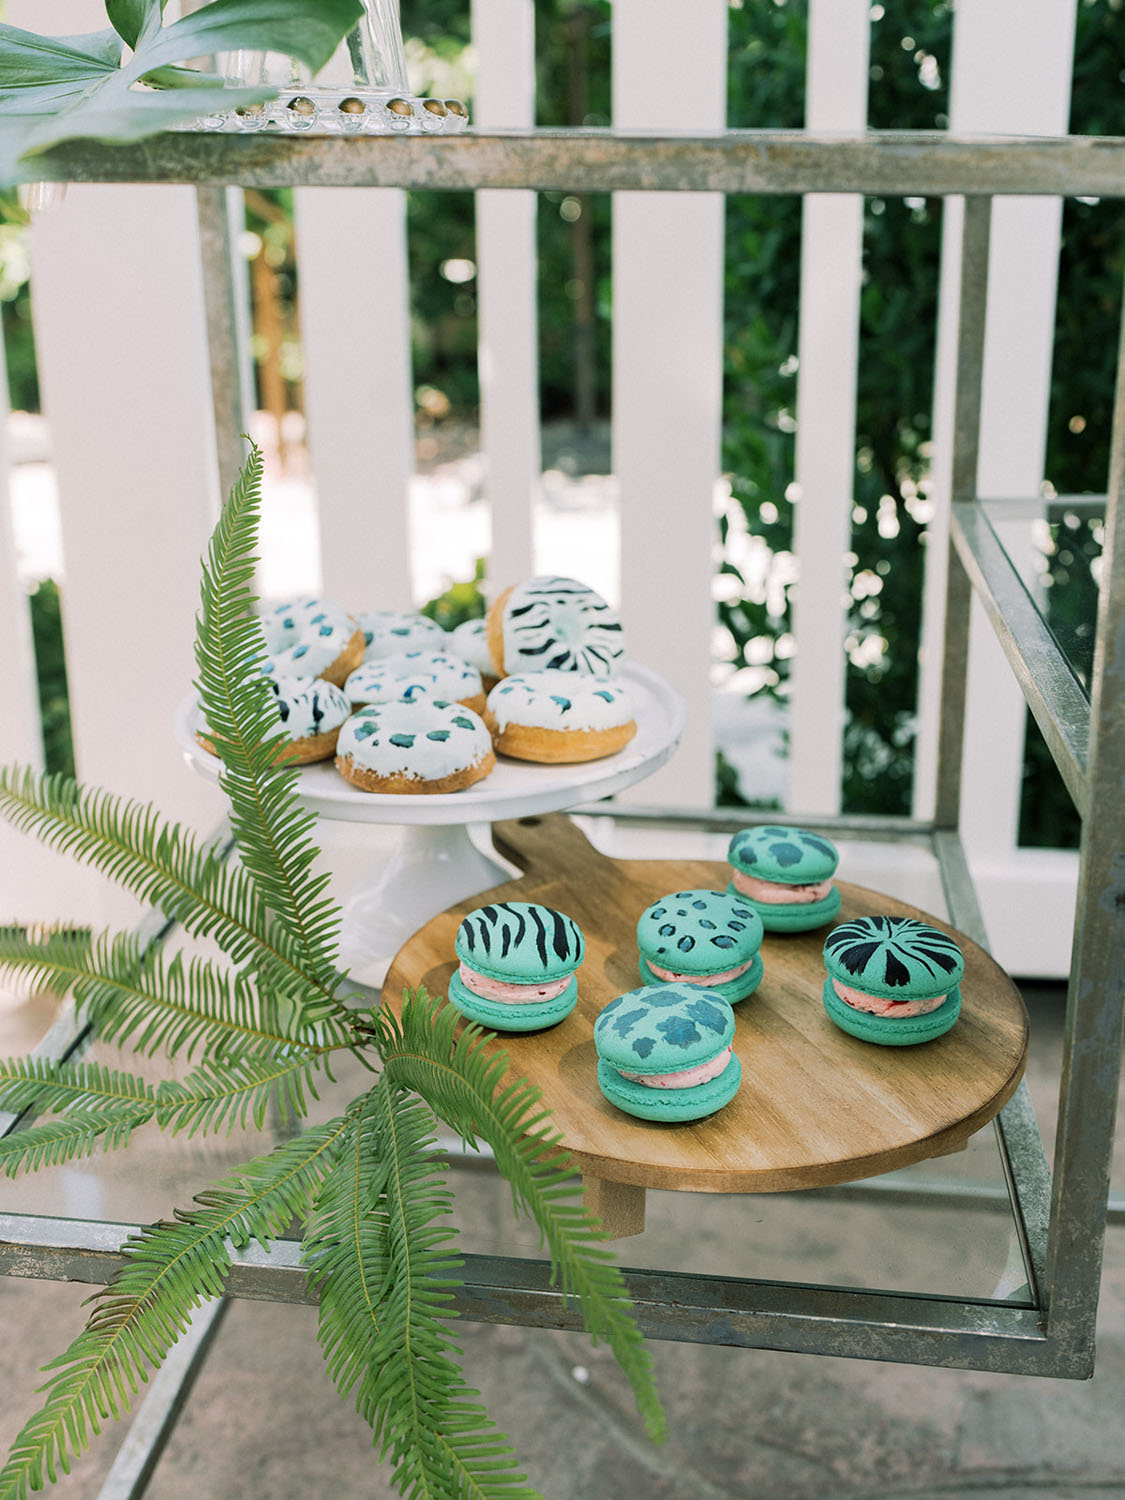 Jungle theme macarons and donuts